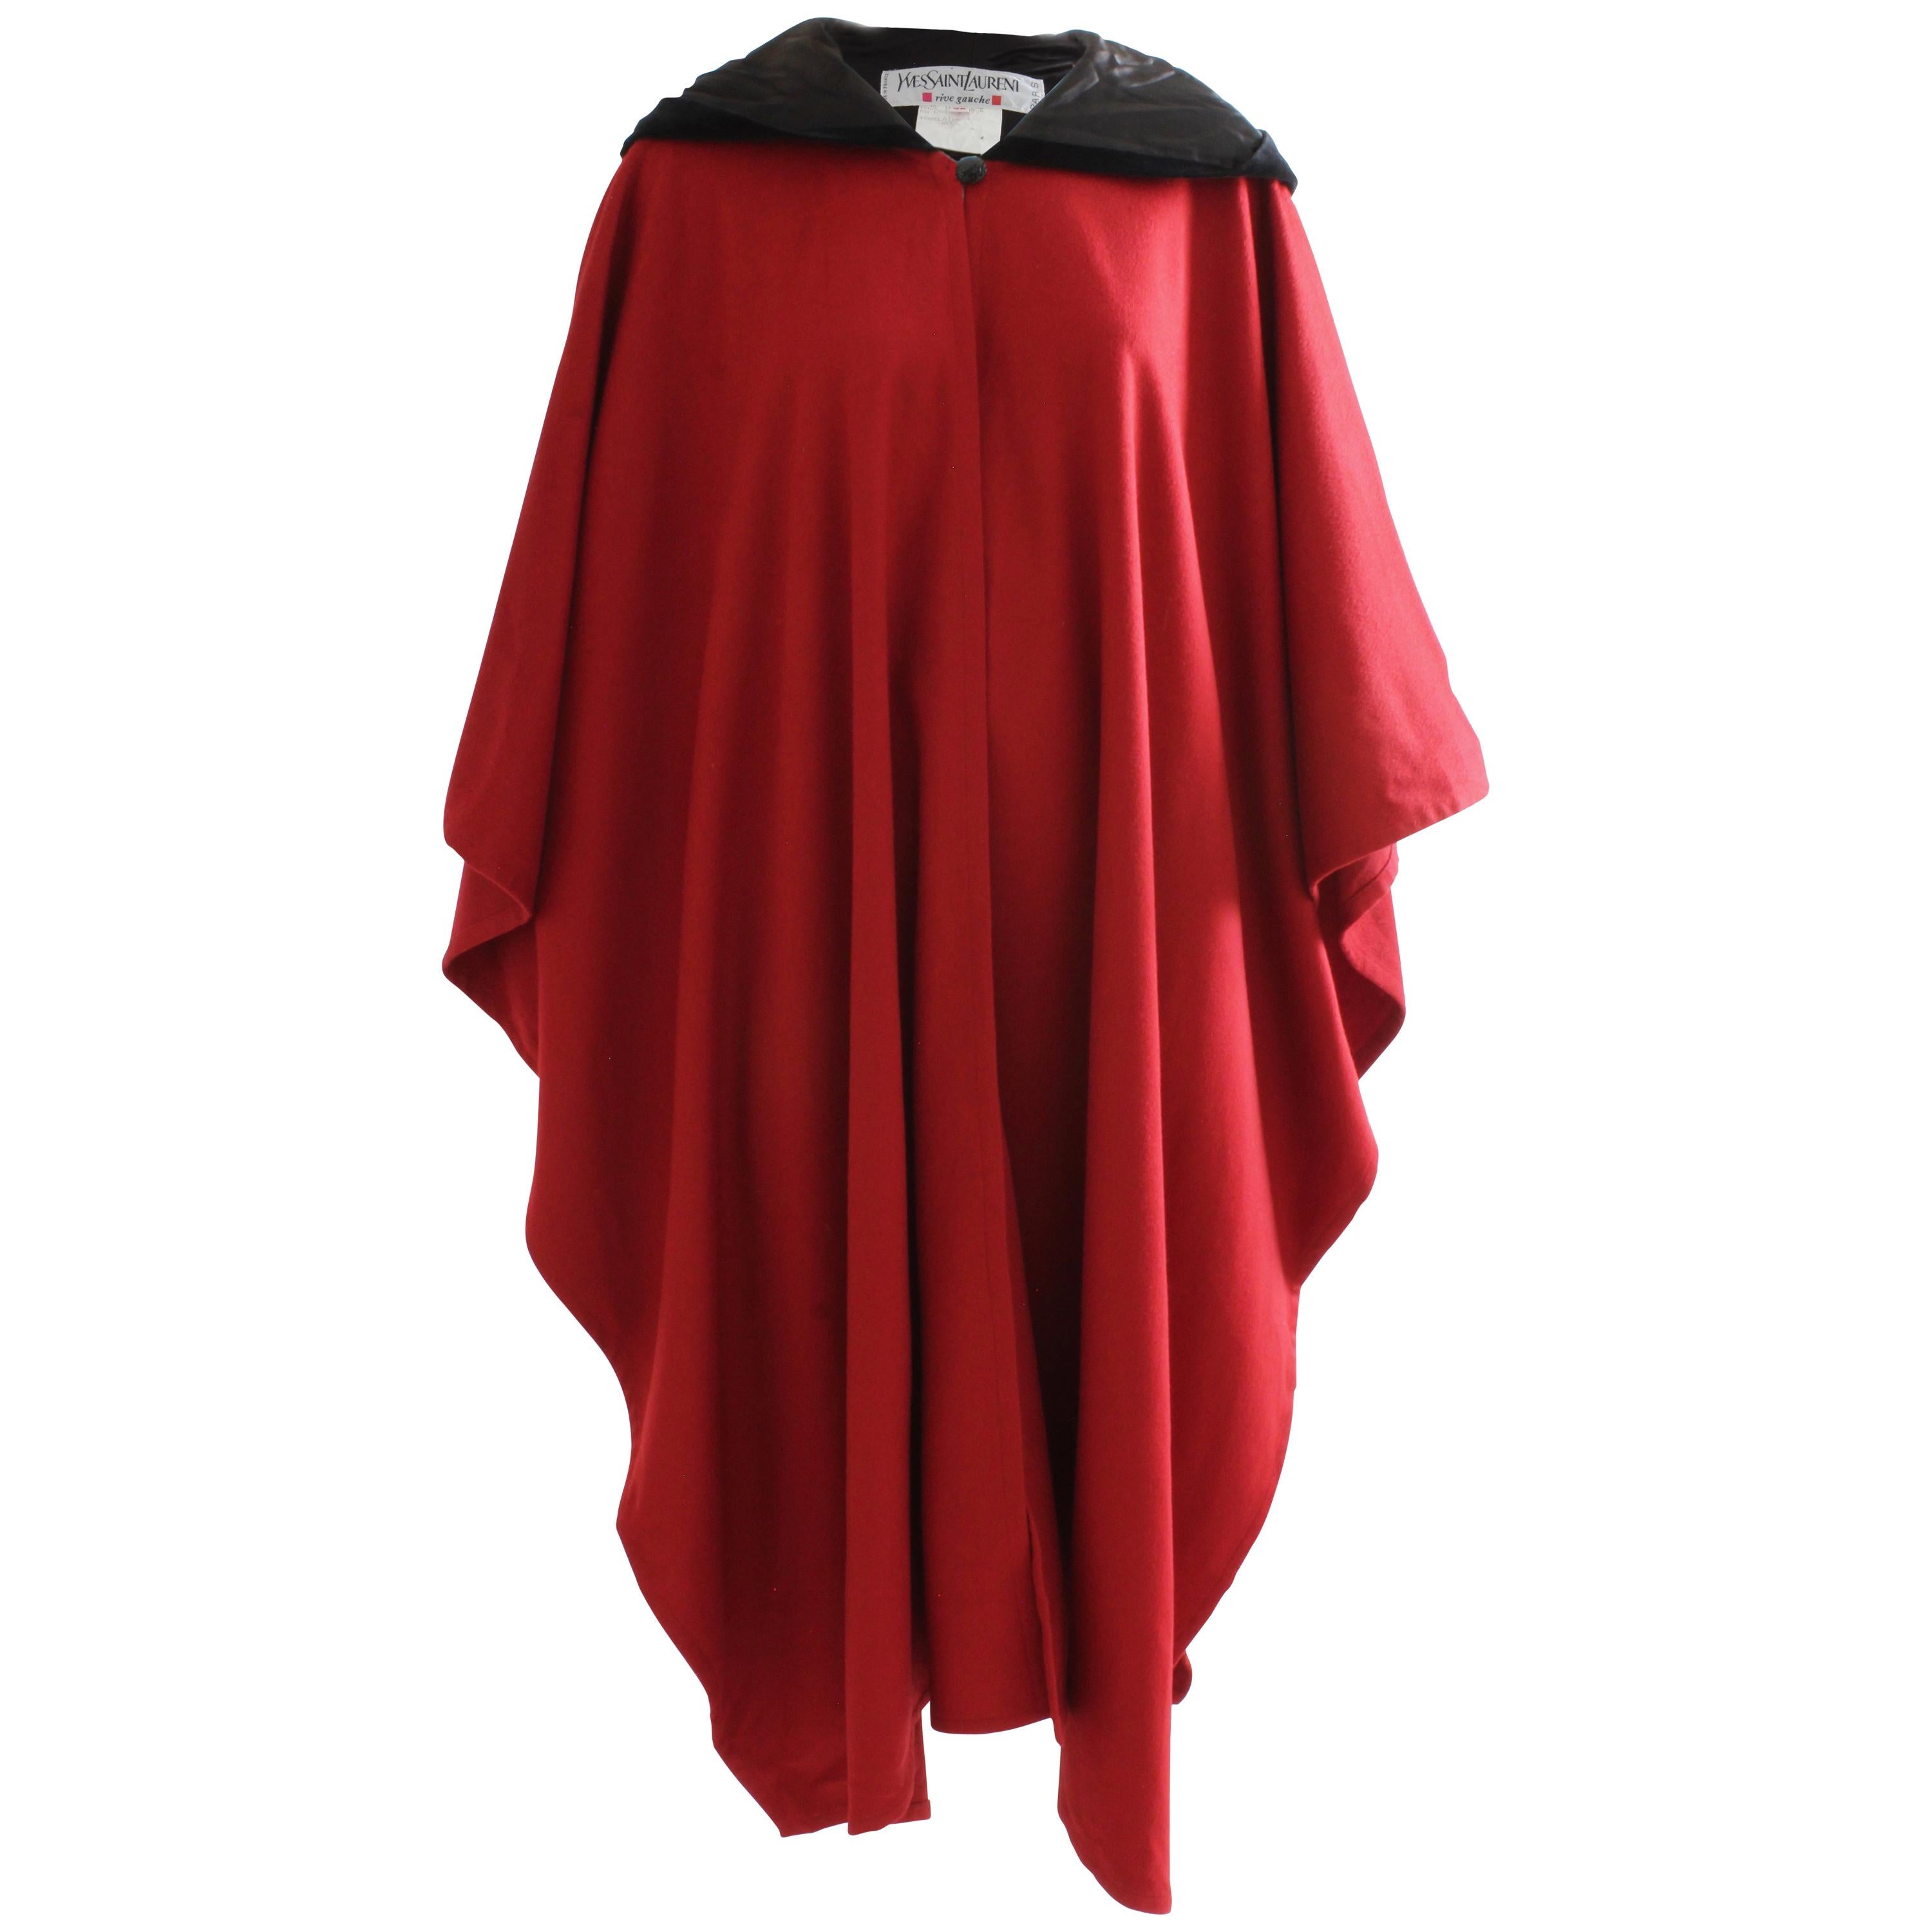 This cape is amazing and SO hard to find in this color! Made from a rich garnet red wool, it features a black silk velvet hood and insert panel on the back.  The cape is unlined, the hood is lined in black silk. Fastens with a single black button. 